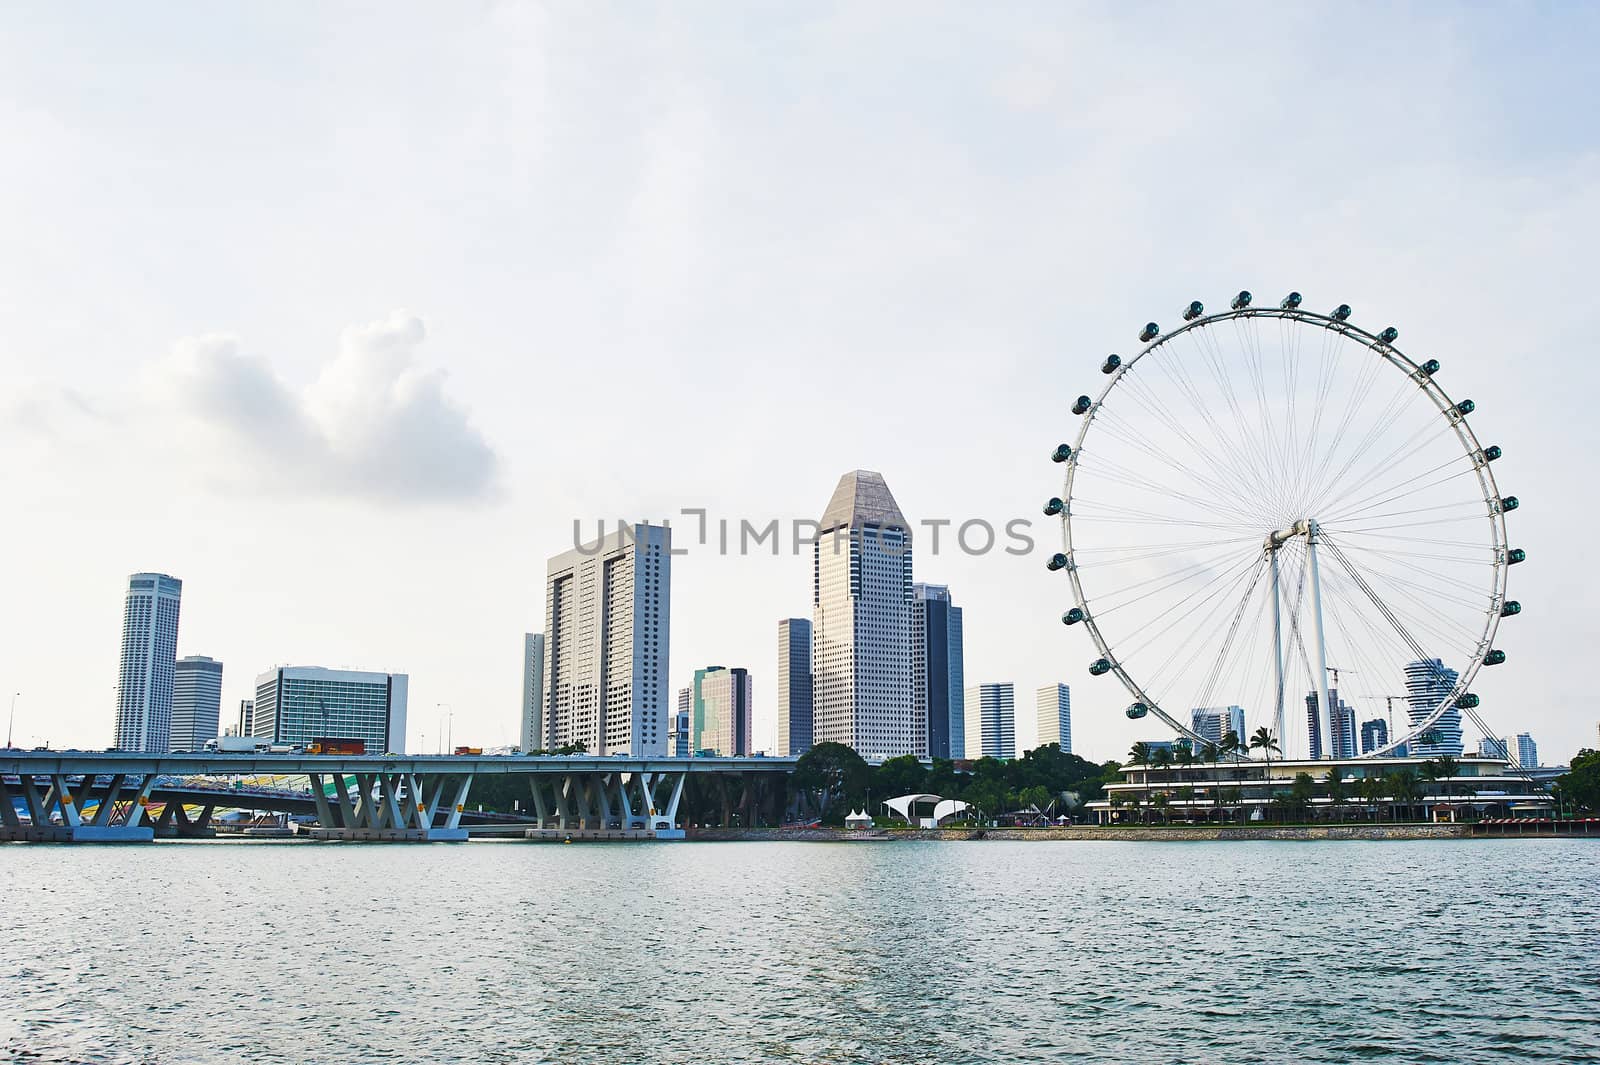 Skyline of Singapore with Flyer and modern buildings